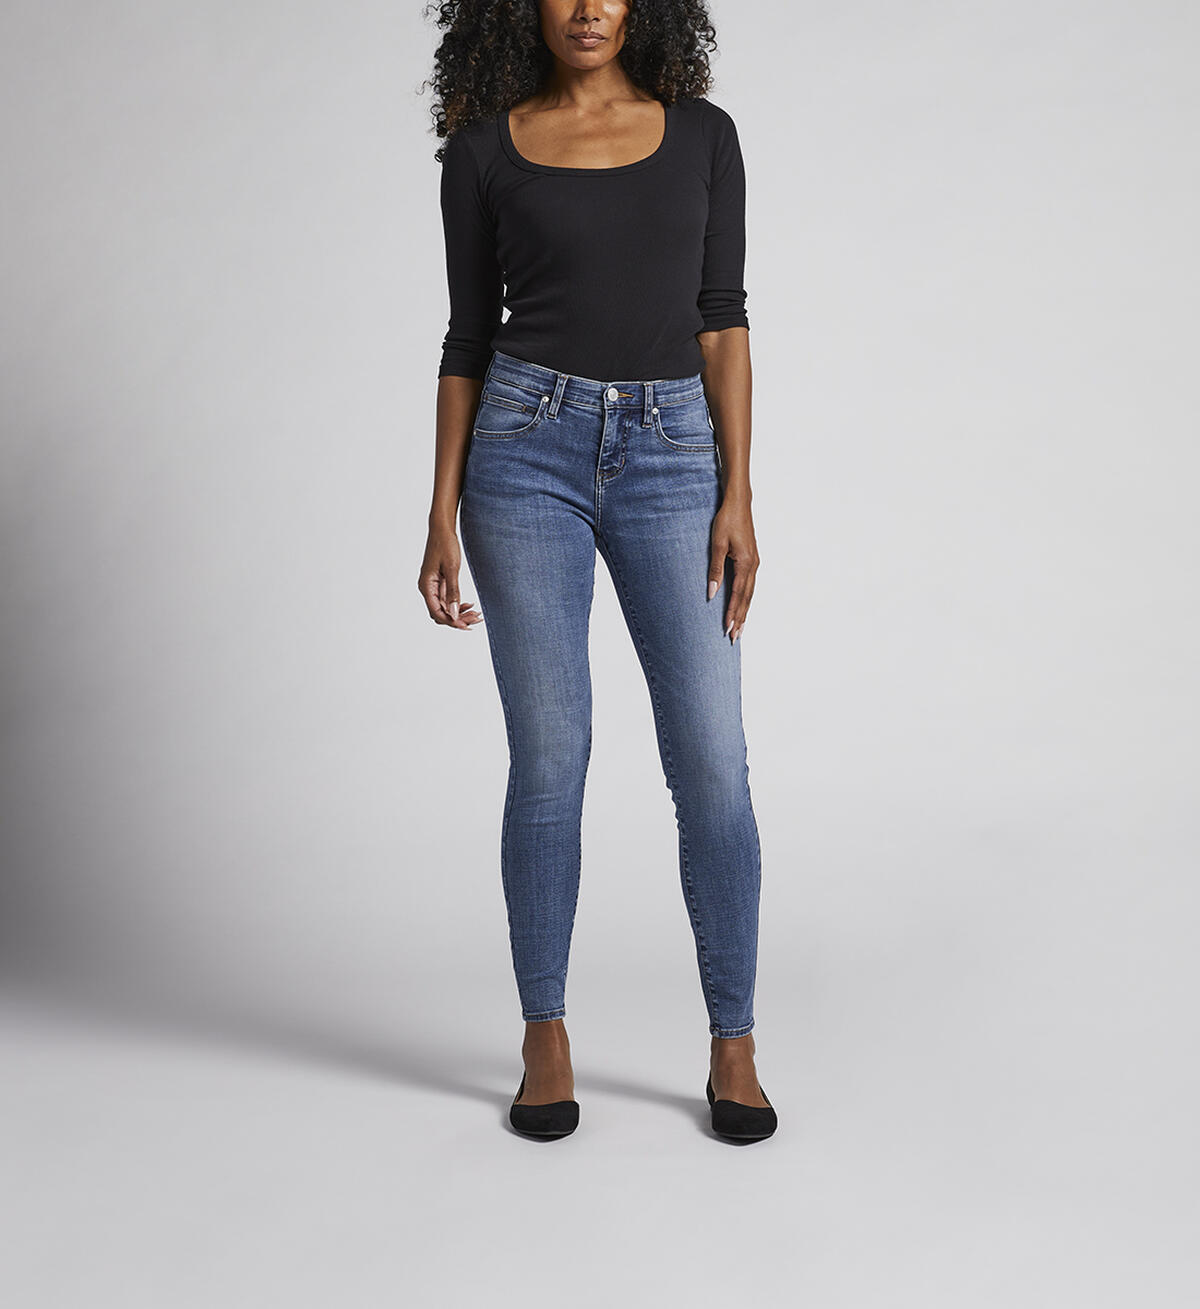 Cecilia Mid Rise Skinny Jeans, , hi-res image number 0